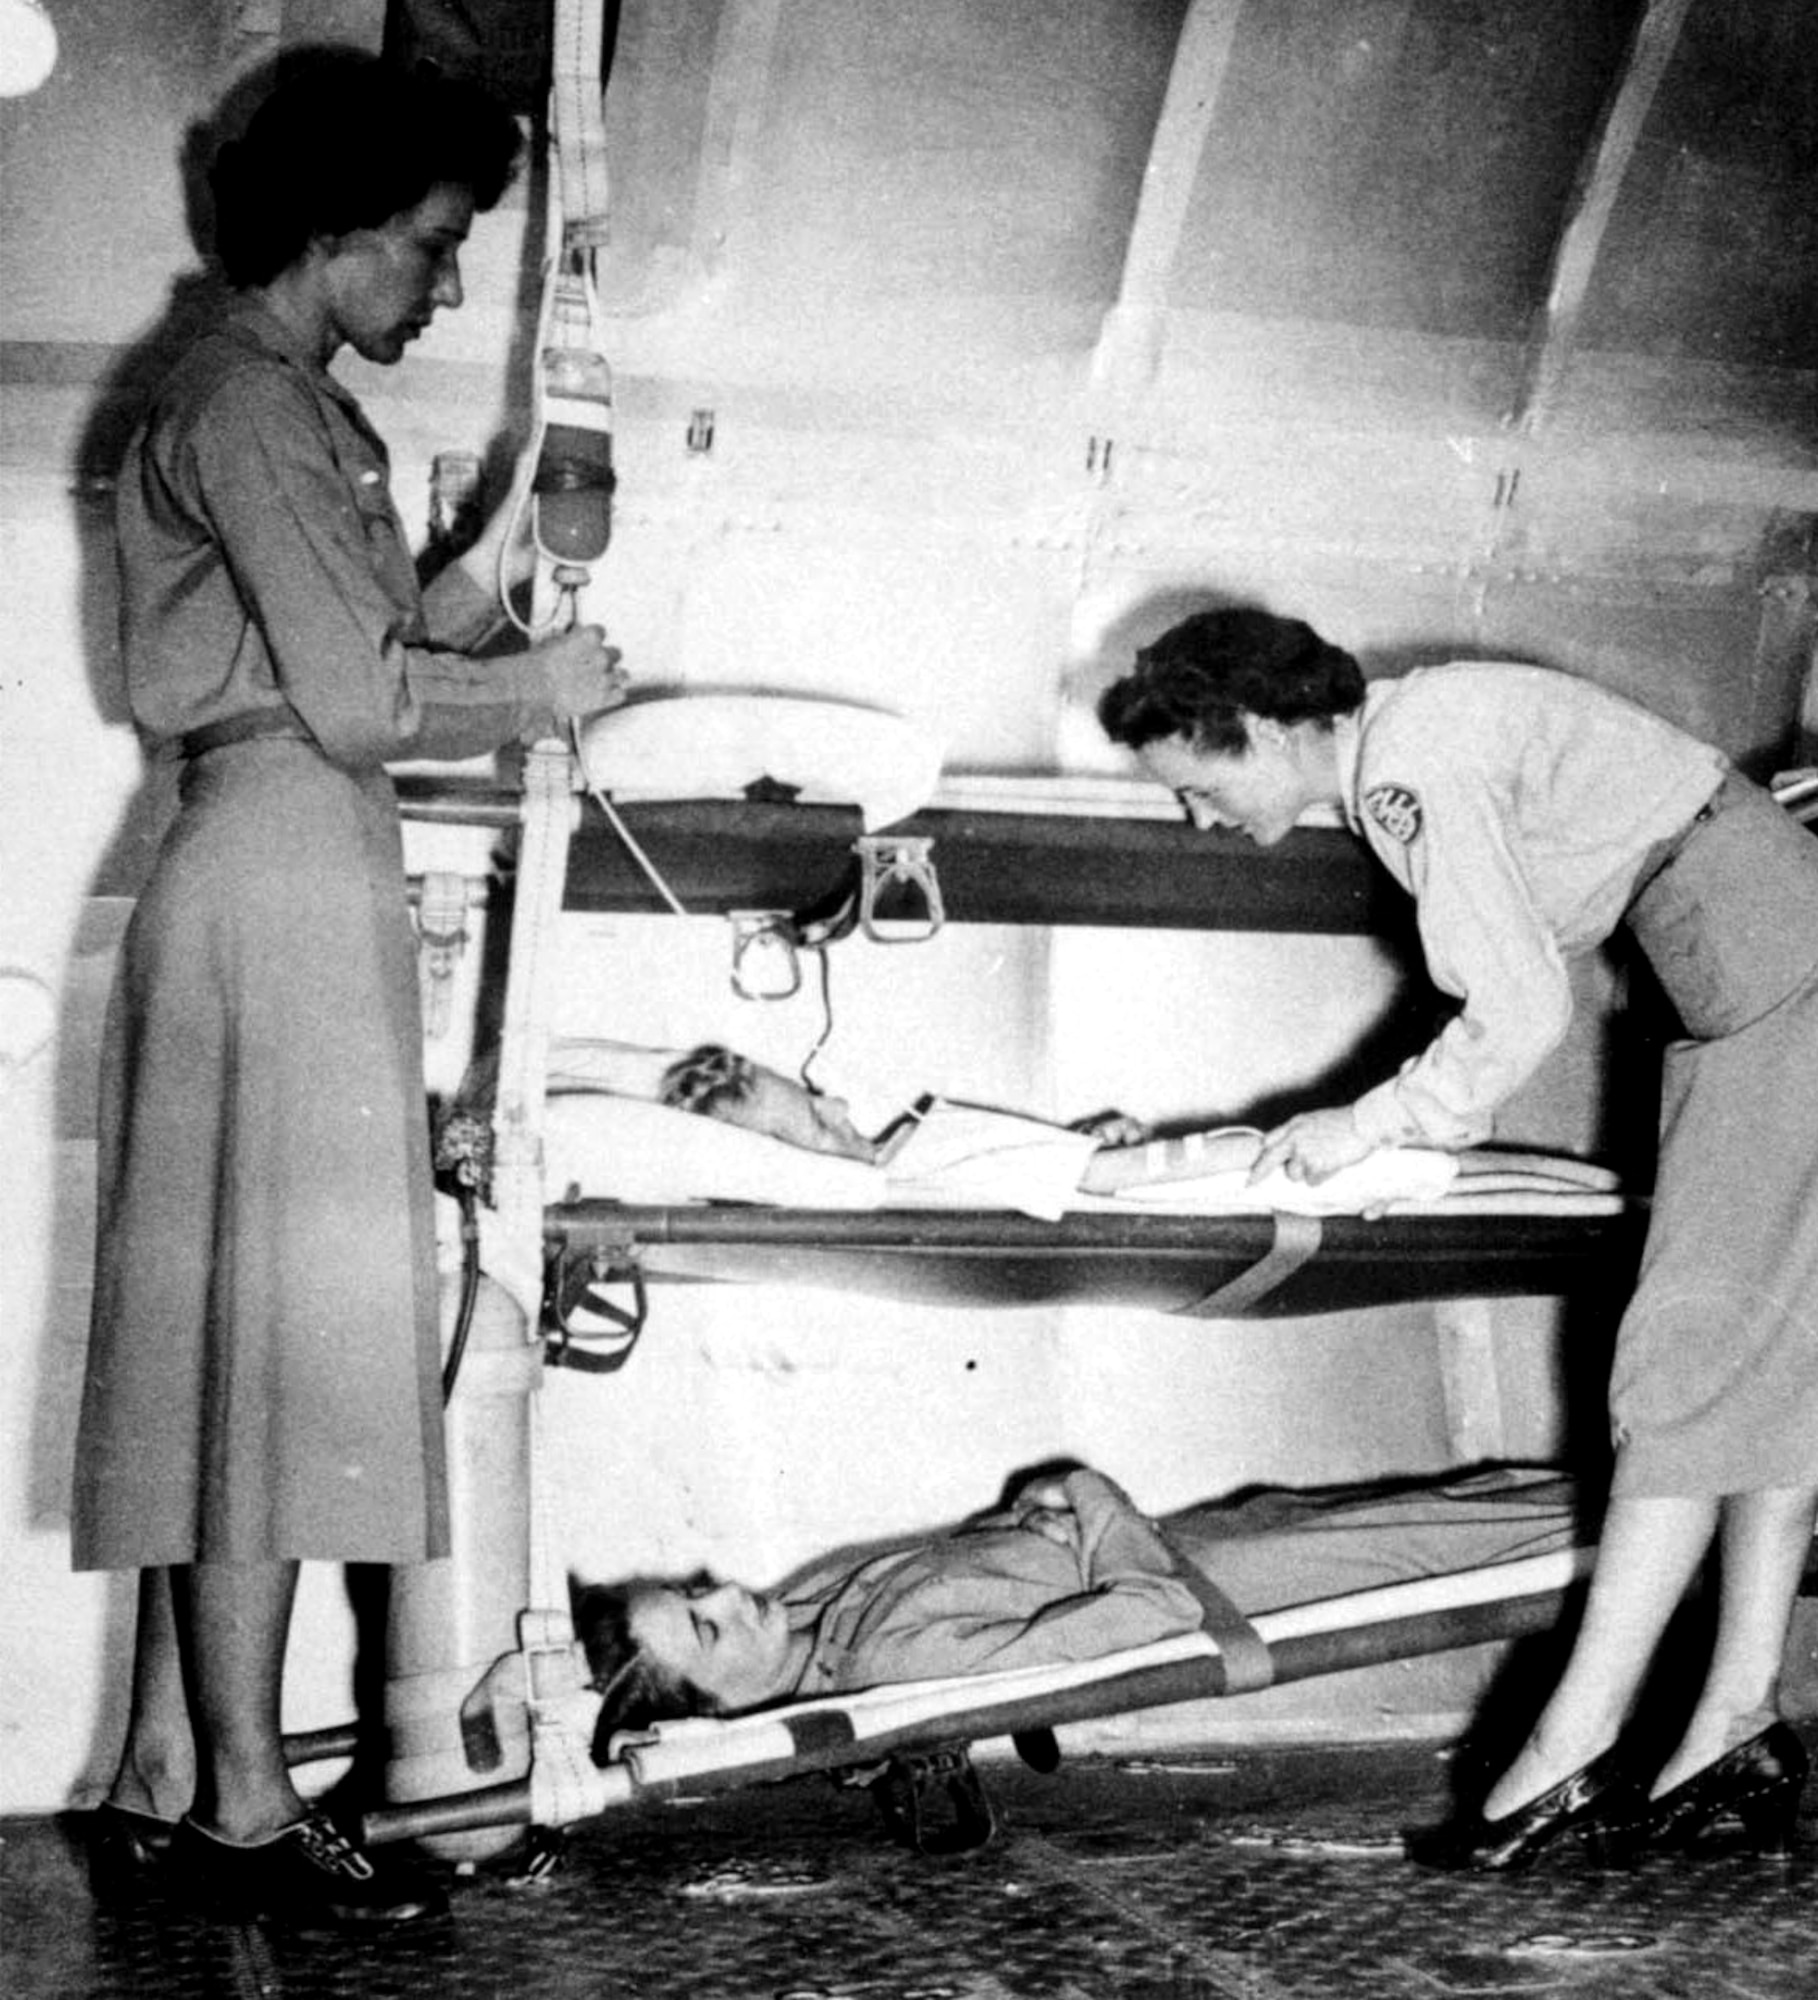 WORLD WAR II -- Although the role of the flight surgeon was developed in World War I, it was not until November 1942, when the School of Air Evacuation opened at Bowman Field, Ky., that the flight surgeon's counterpart -- the flight nurse -- became a member of the medical flight team.  Before World War II, no care was provided to wounded Soldiers during evacuation flights.  (Courtesy photo)